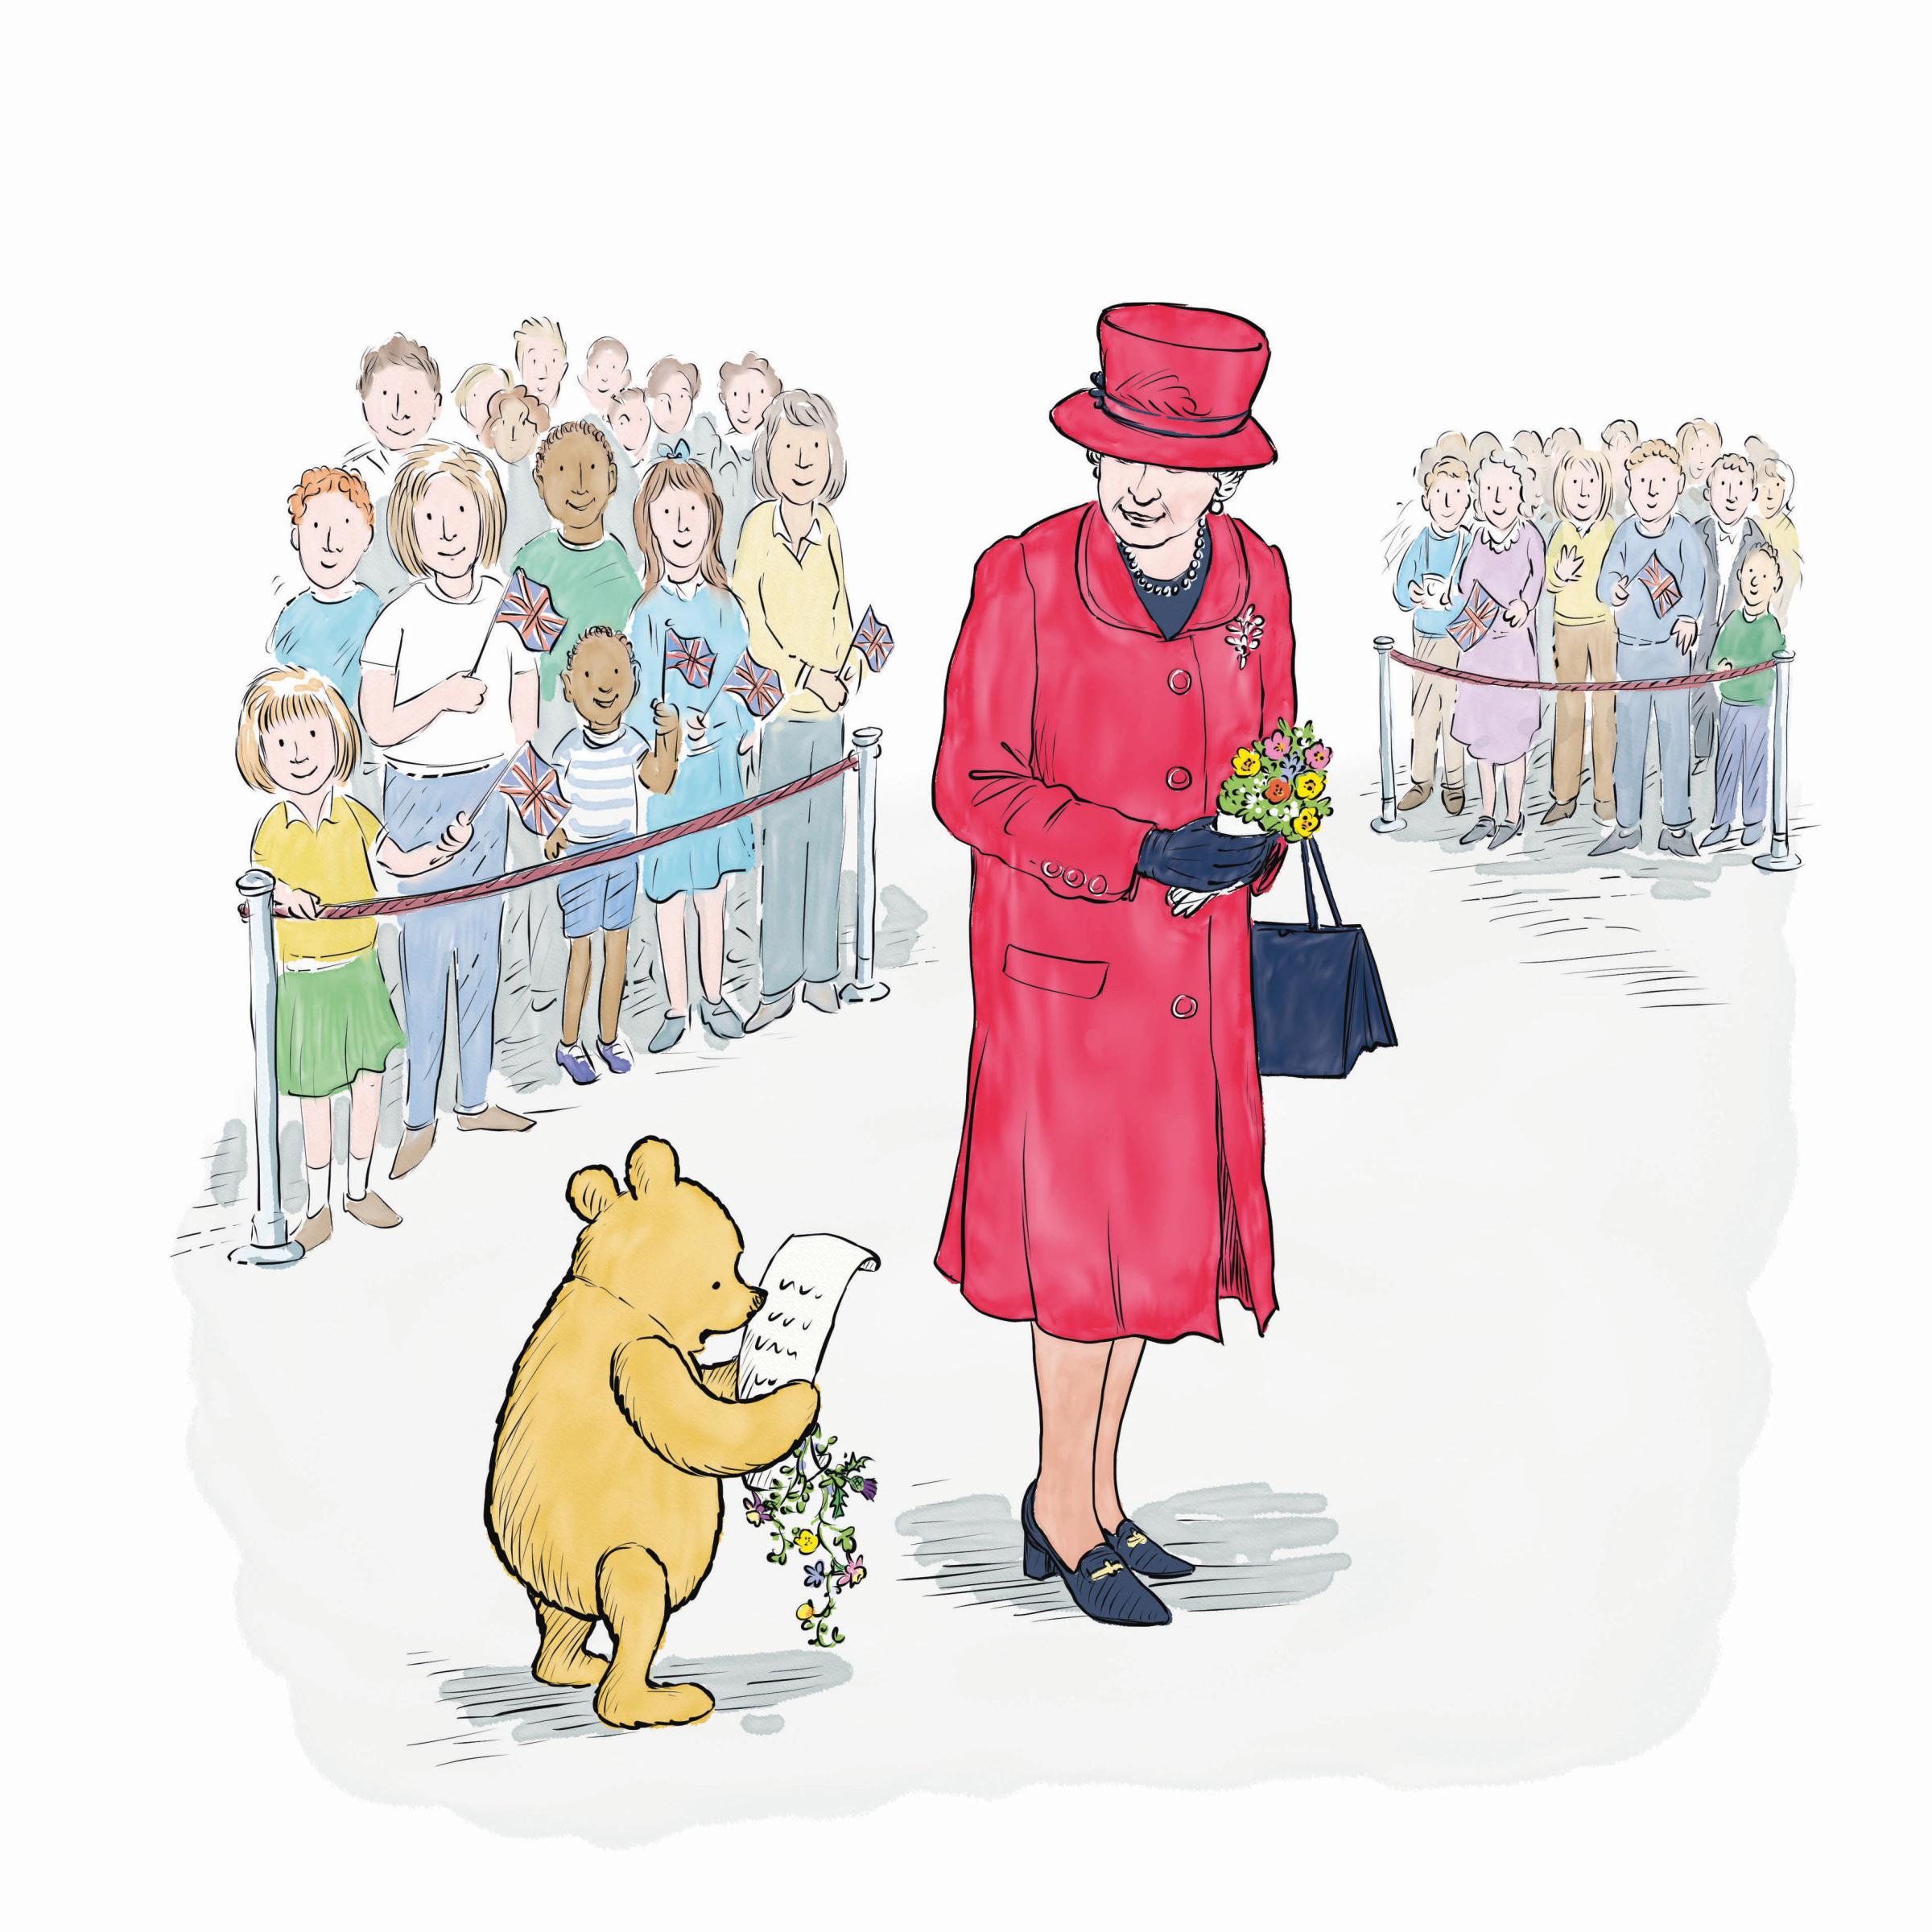 Winnie-The-Pooh And The Royal Birthday, a new adventure story has been released to celebrate both of their 90th birthdays, May 26, 2016.